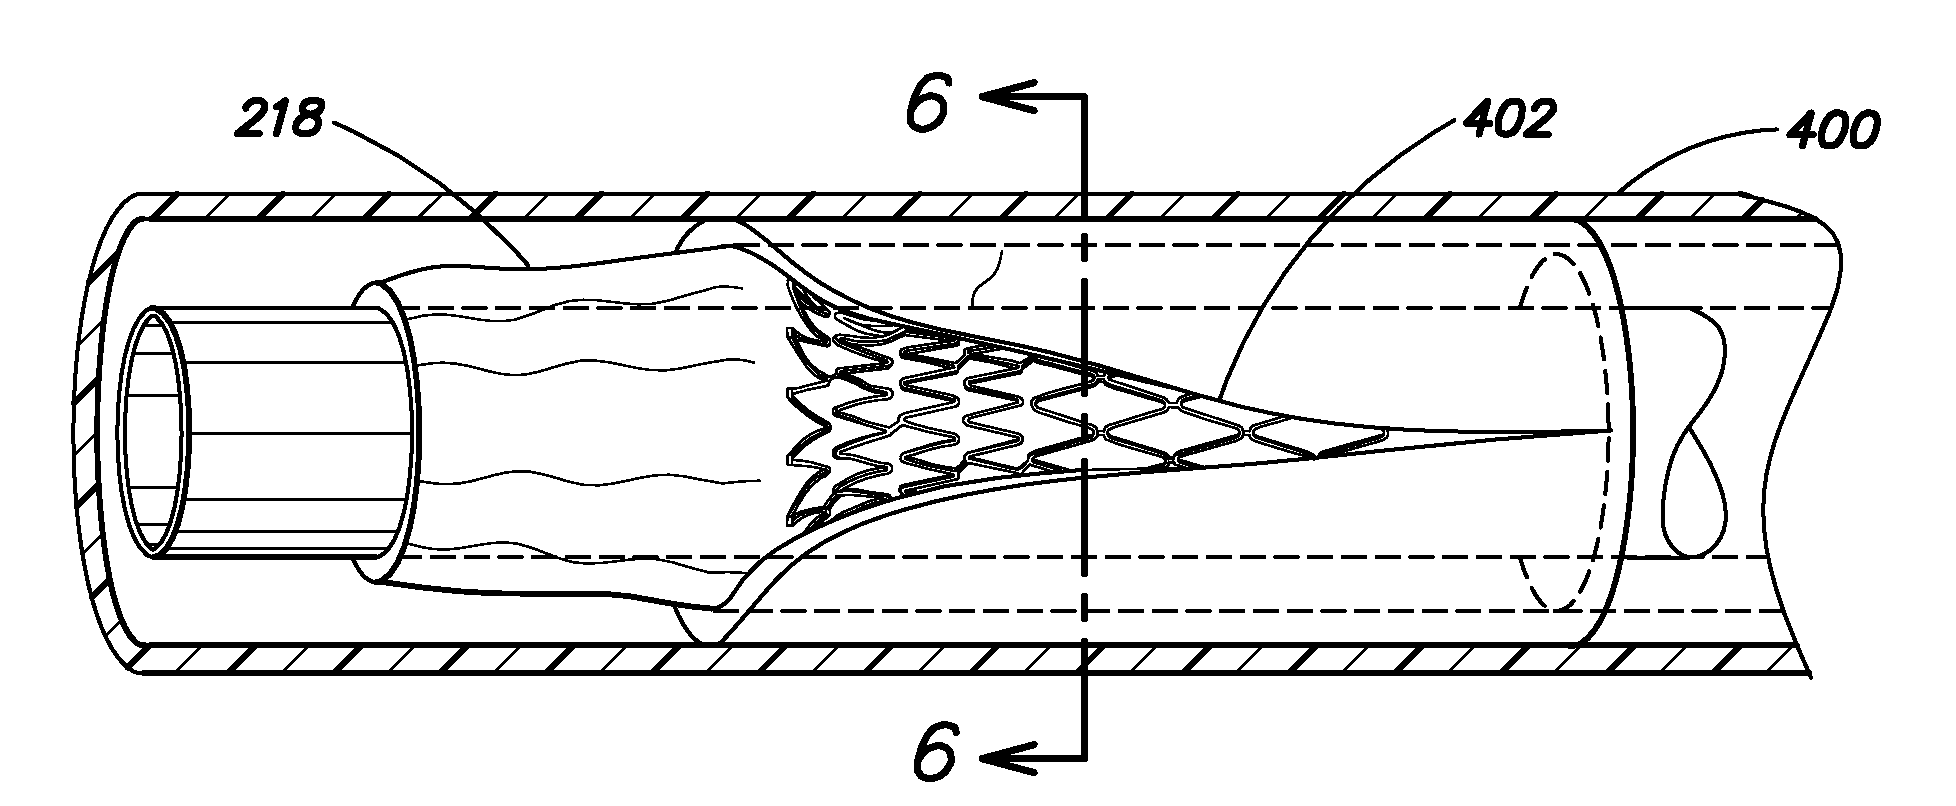 Delivery System With Profiled Sheath Having Balloon-Oriented Position